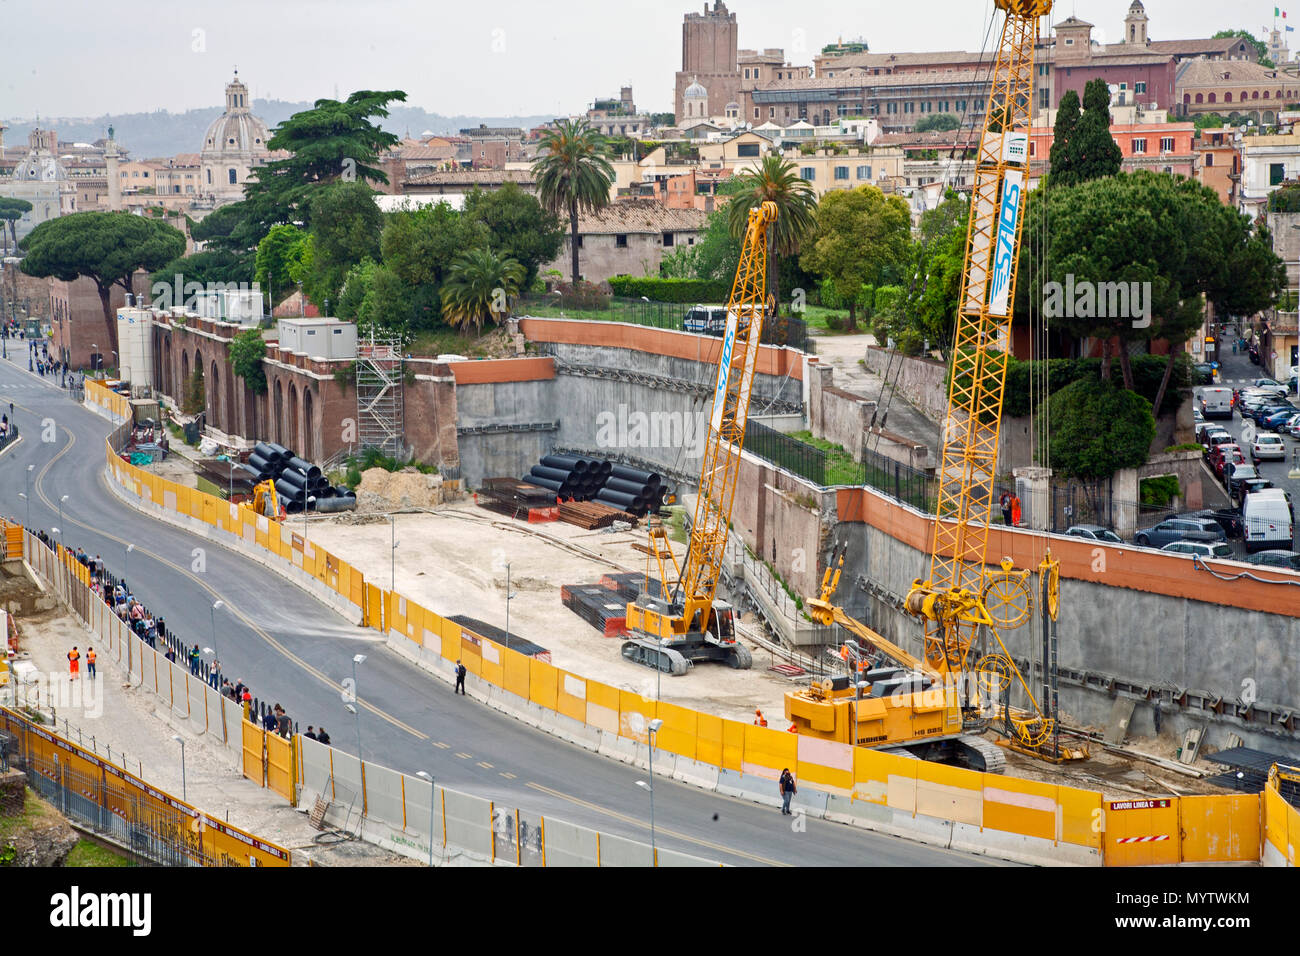 May 11, 2016: Rome, Italy- the construction of a transportation system being built on a roadway Stock Photo